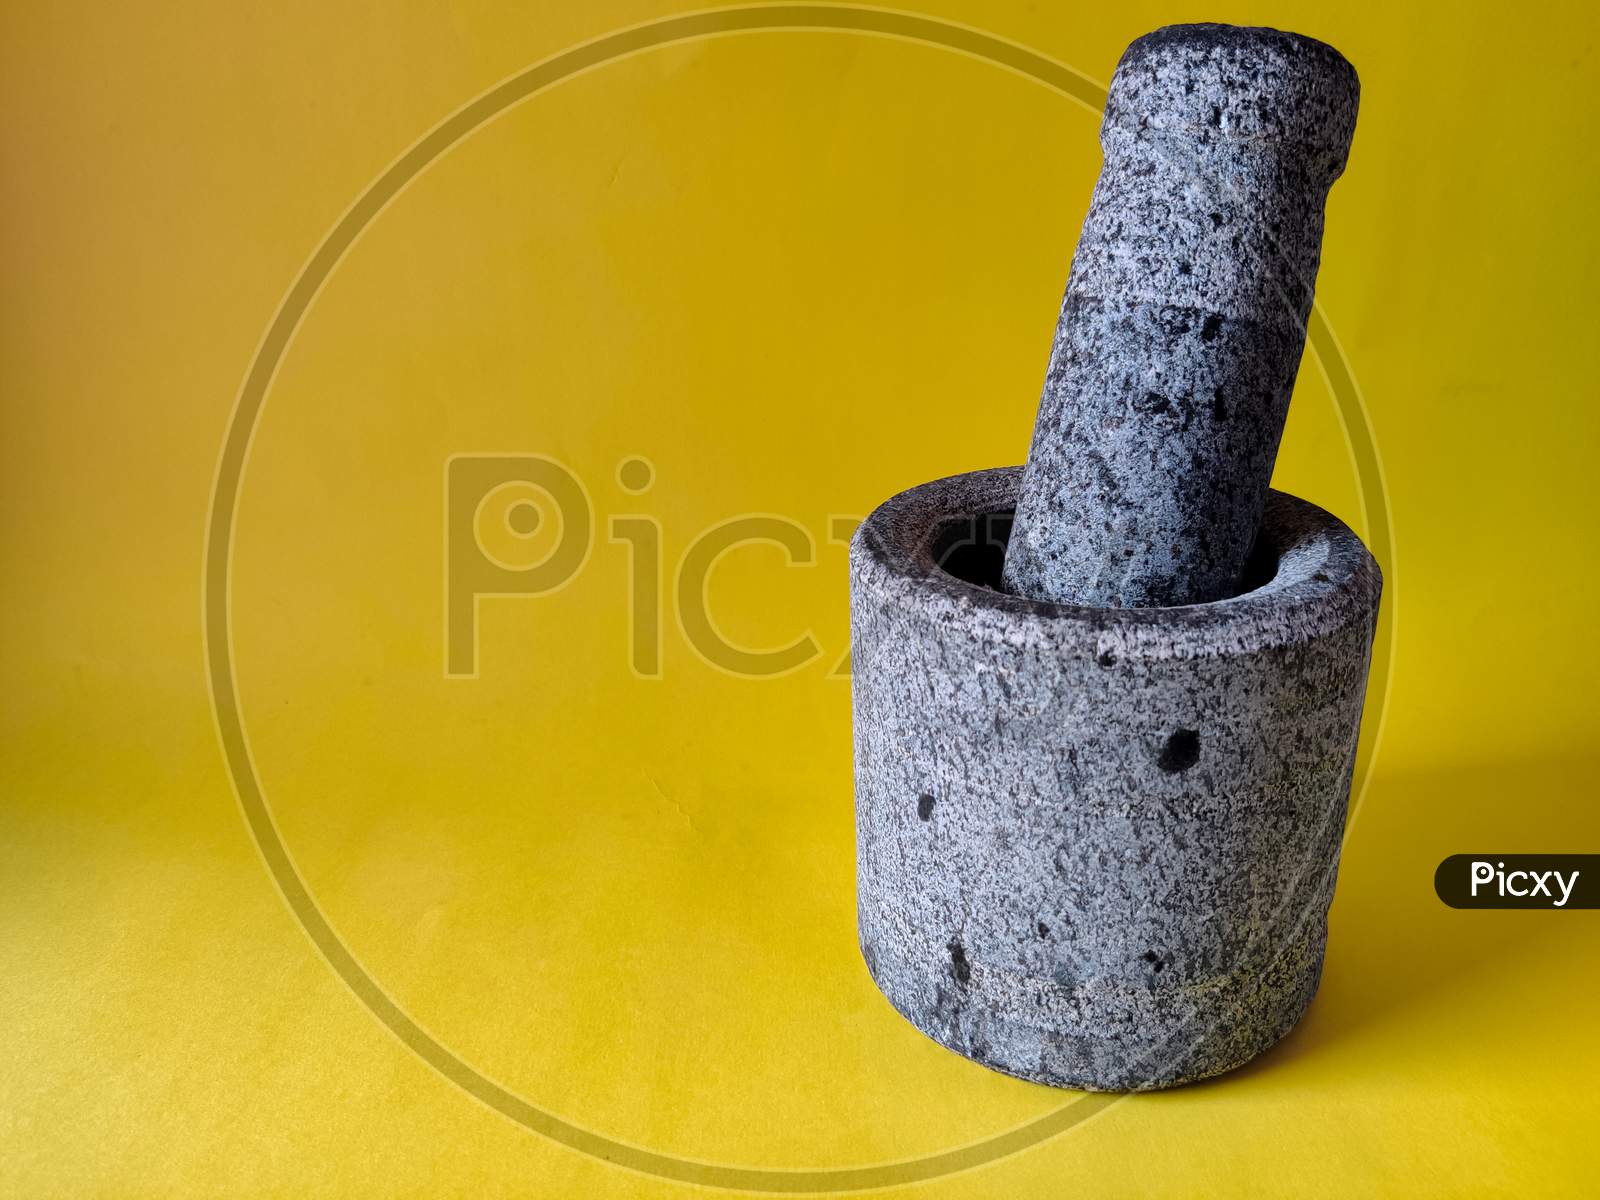 Mortar And Pestle Set Made Of Stone. Isolated On Yellow Background. Copy Space